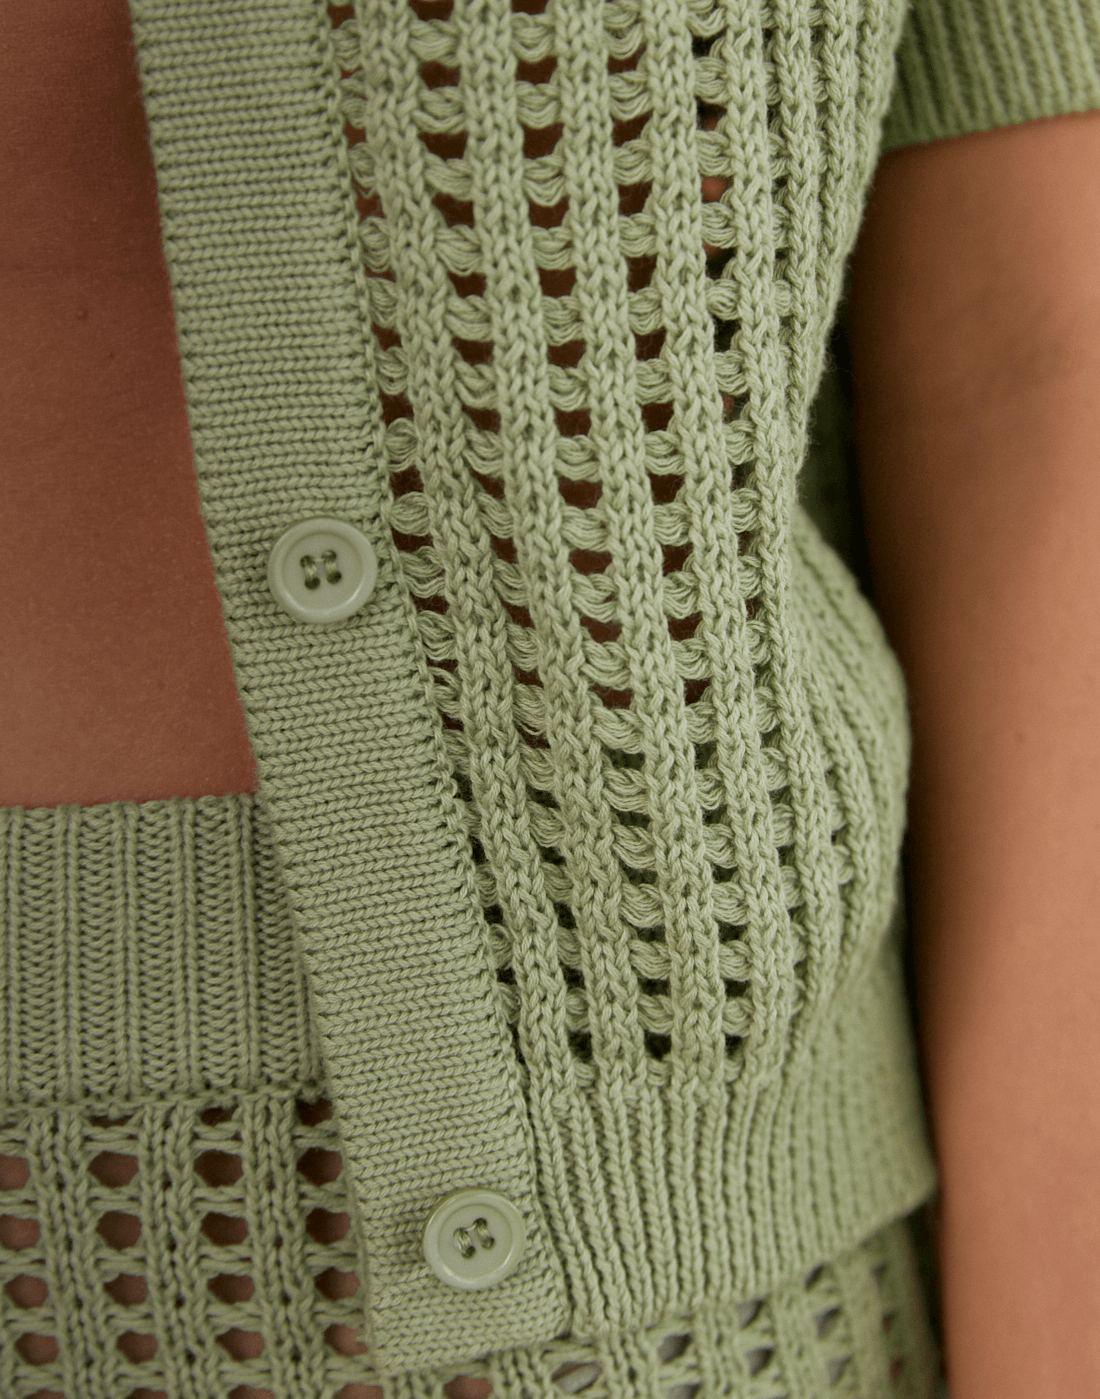 Spring Fresh Top (Muted Lime) - Knitted Top - Women's Top - Charcoal Clothing